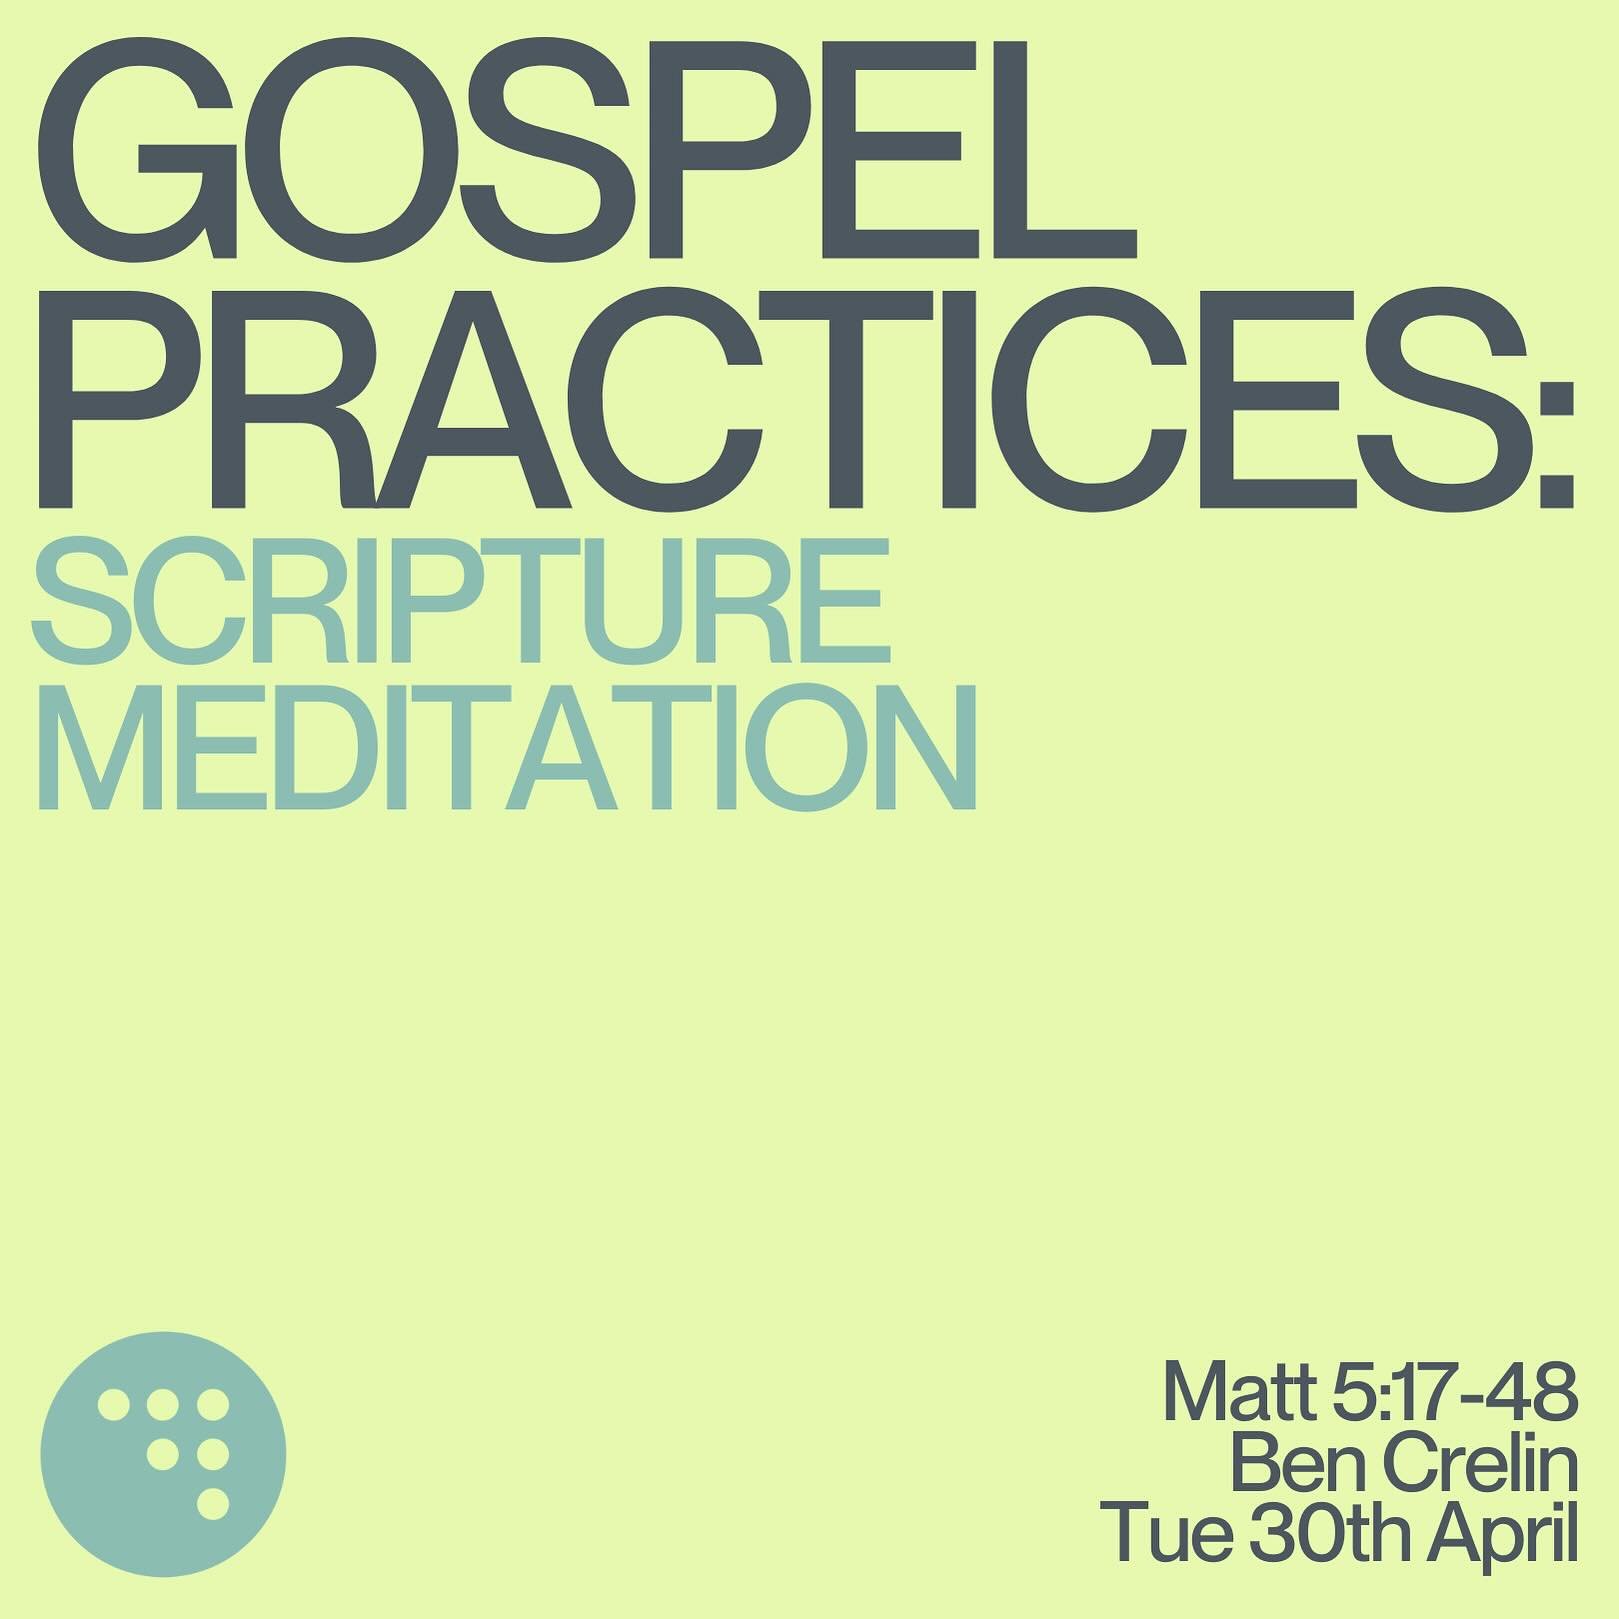 Come to student night tomorrow at 7pm for food, worship, talk and small groups. Ben is continuing our series on Gospel Practices in the Sermon on the Mount, and this week we&rsquo;re looking at the practice of Scripture Meditation! See you there :)

